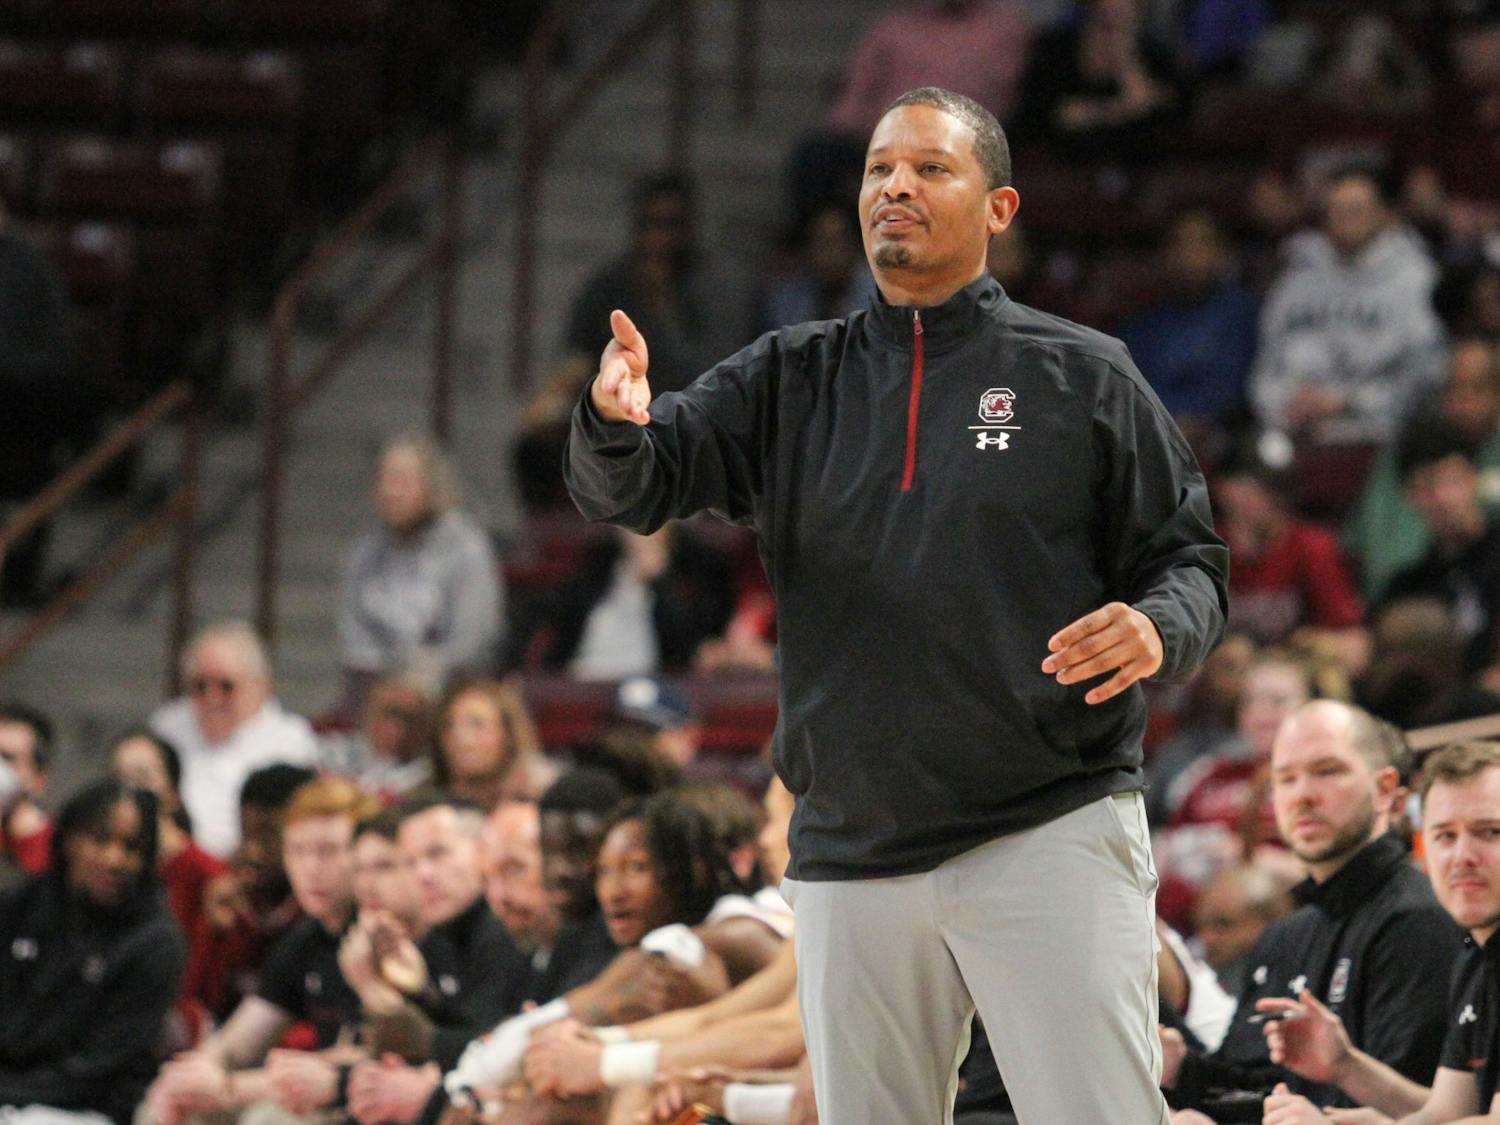 Head coach Lamont Paris calls a play during South Carolina’s game against Georgia on March 4, 2023, at Colonial Life Arena. The Gamecocks beat the Bulldogs 61-55.